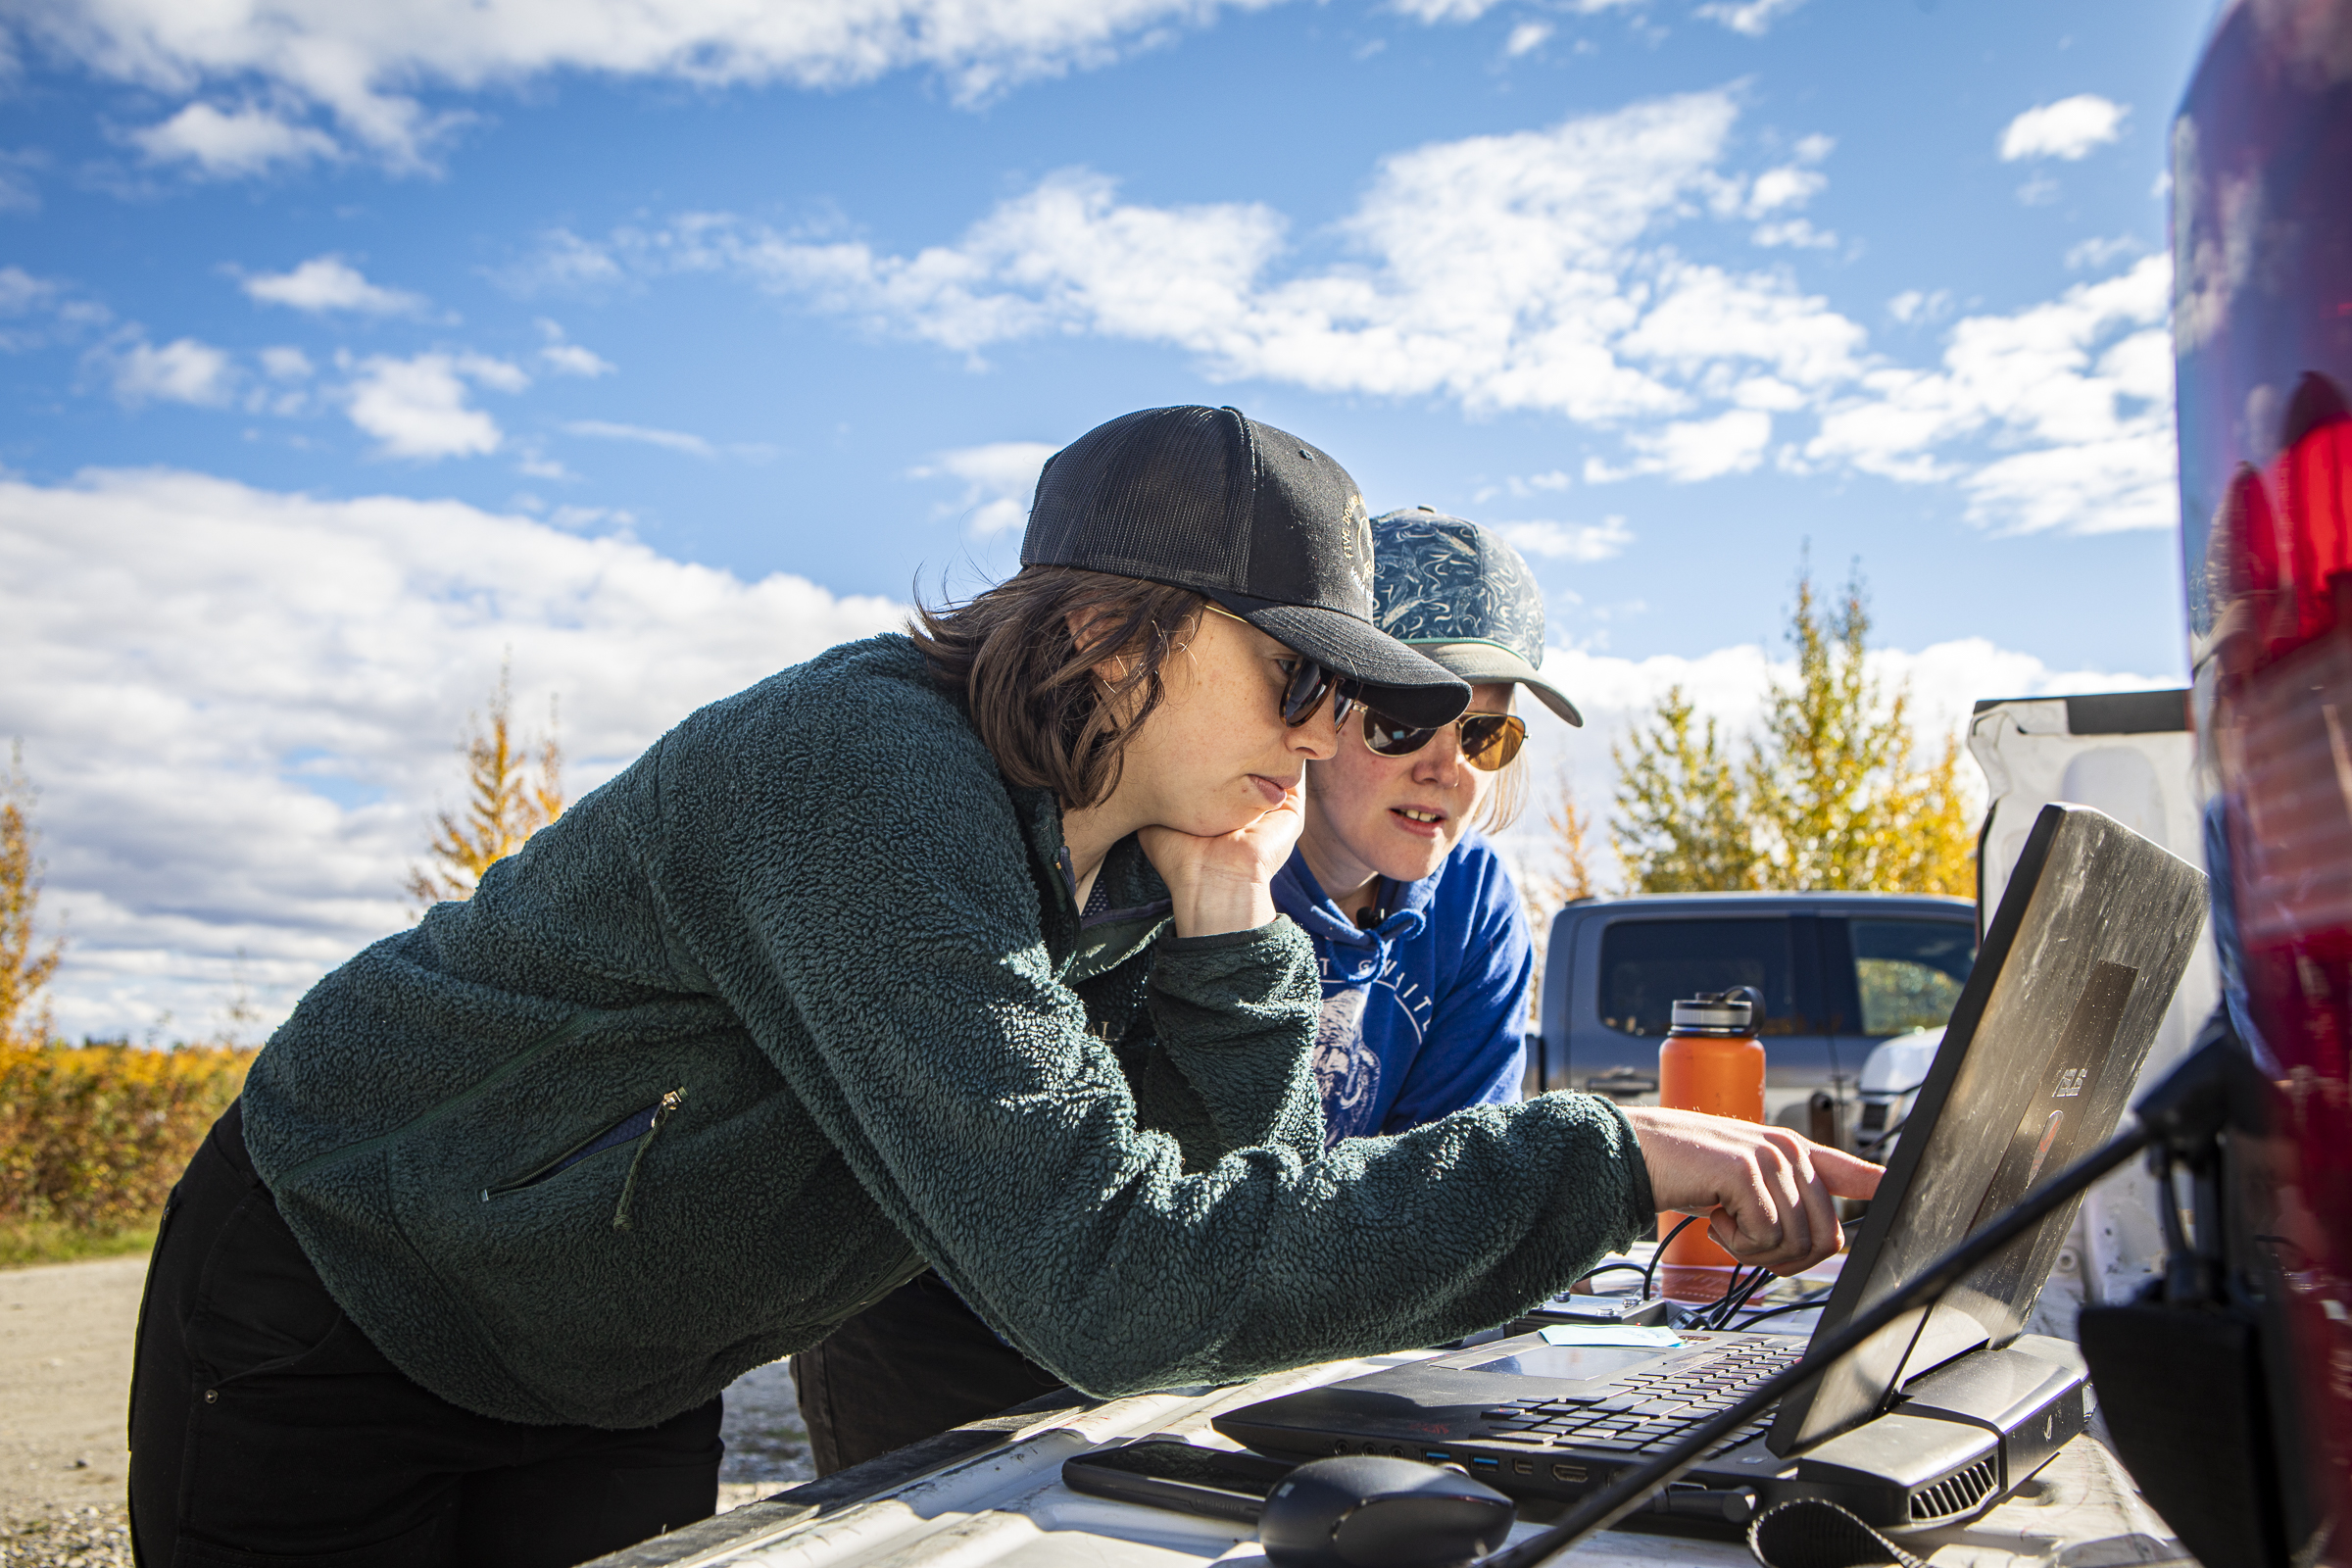 Researchers with the Alaska Center for Energy and Power use their new fixed-wing eBee X unmanned aerial vehicle to analyze erosion of the Tanana River with aerial photogrammetry at a test site near Nenana in September 2021. UAF photo by Leif Van Cise.